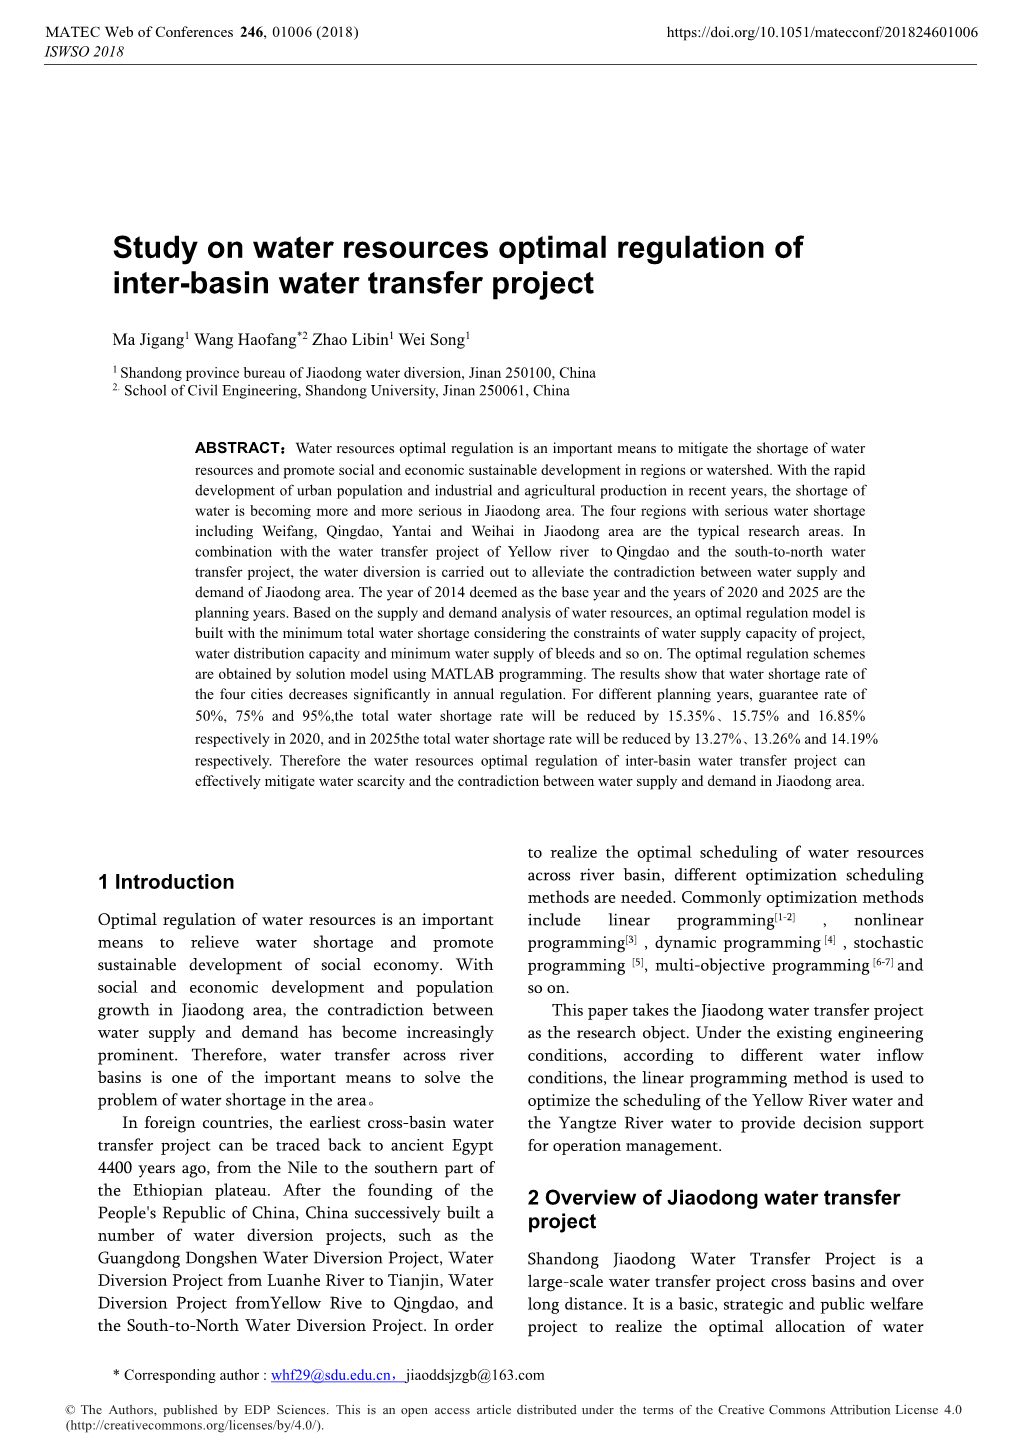 Study on Water Resources Optimal Regulation of Inter-Basin Water Transfer Project